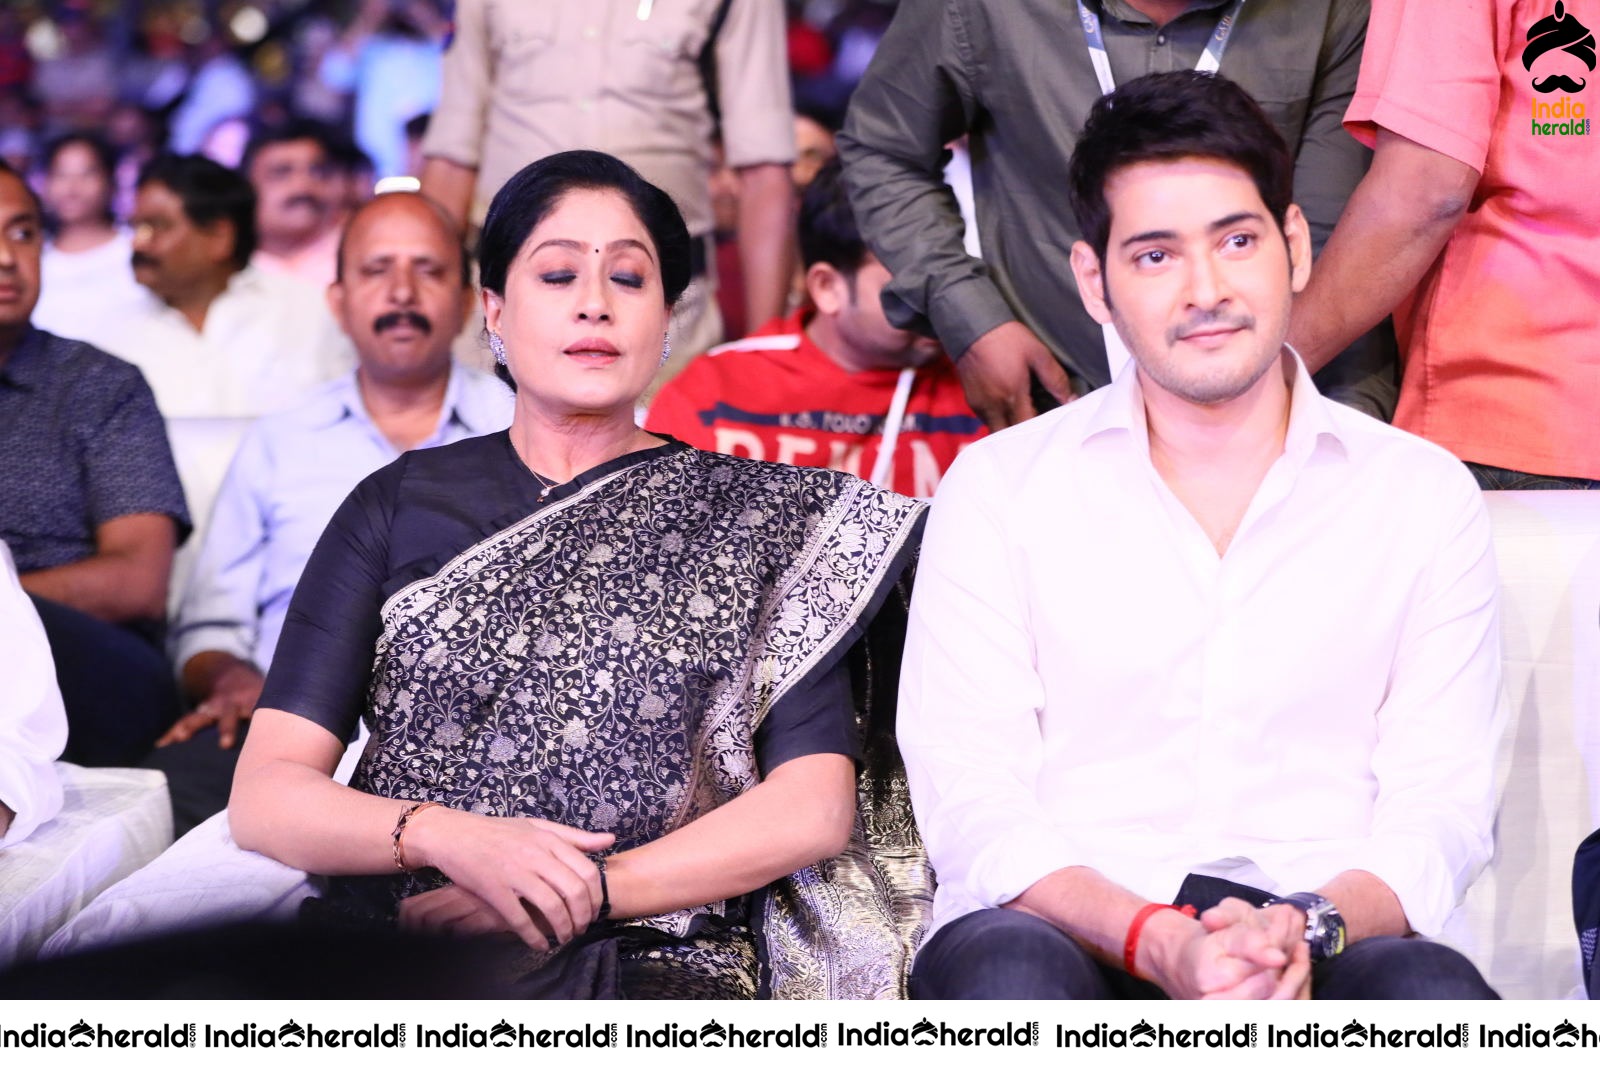 Actor Mahesh Babu seen with Vijayshanthi and having a chit chat session